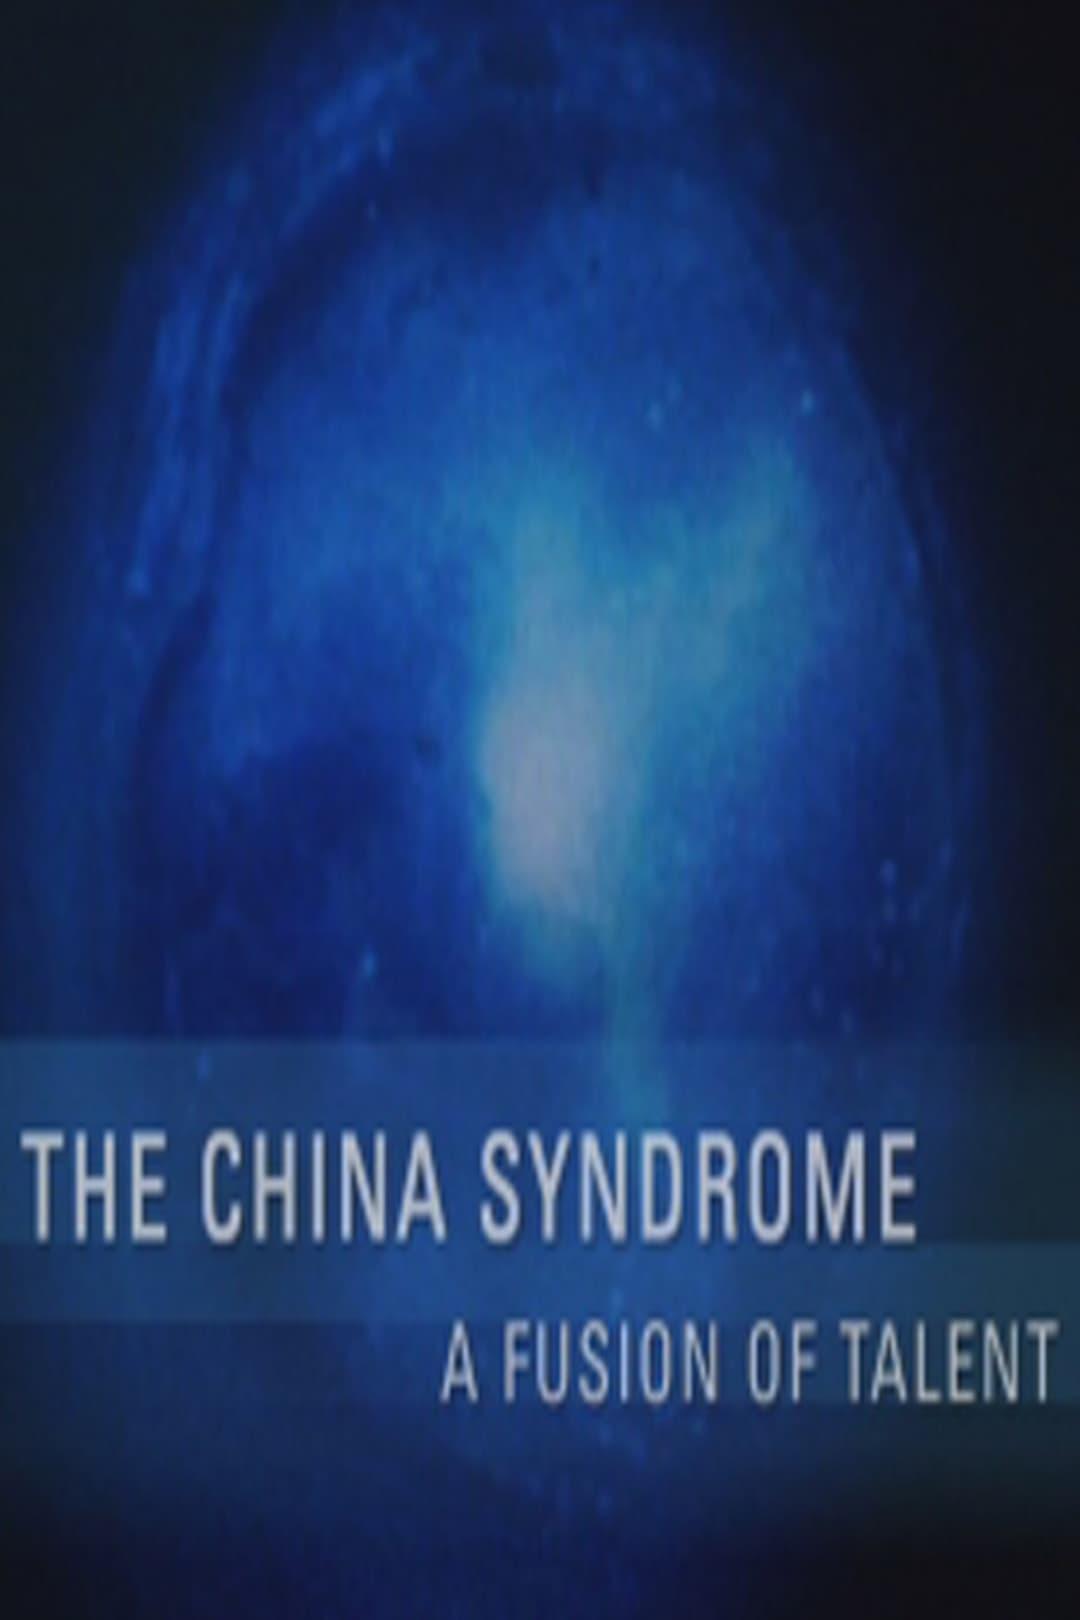 The China Syndrome: A Fusion of Talent poster